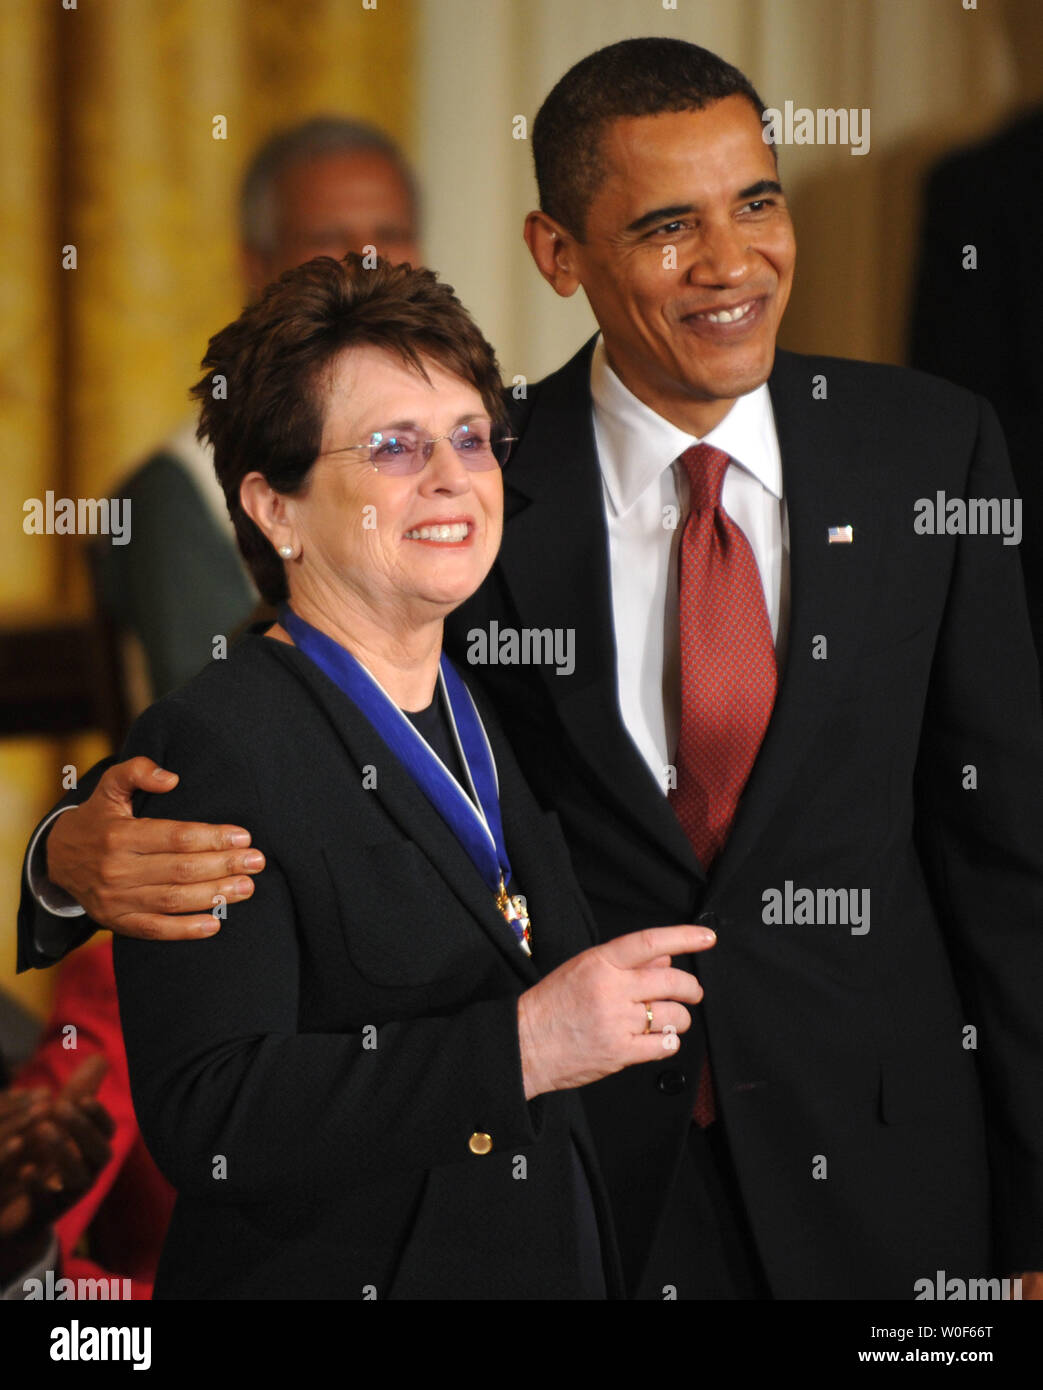 President Barack Obama presents the Presidential Medal of Freedom to Billie Jean King, at the White House in Washington on August 12, 2009.    UPI/Kevin Dietsch Stock Photo